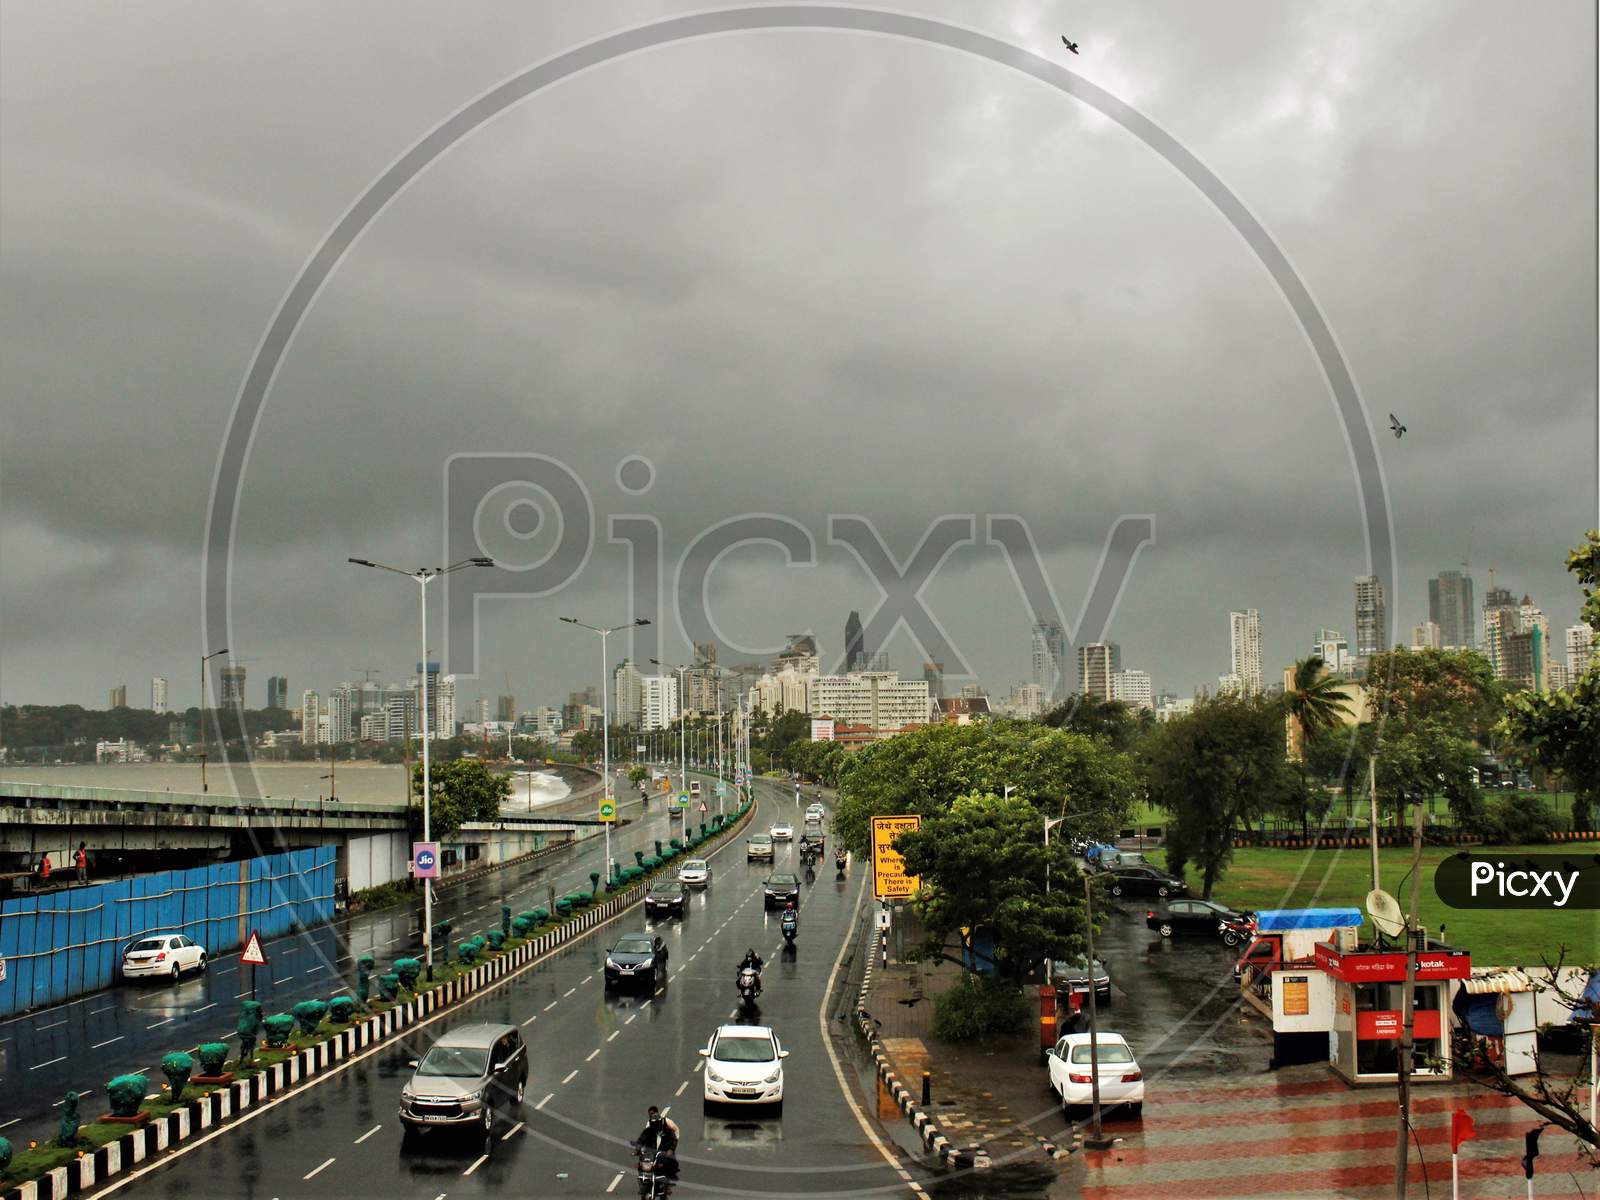 A general view shows dark clouds lingering over the city's skyline at Marine Drive during heavy rains, in Mumbai, India on June 18, 2020.